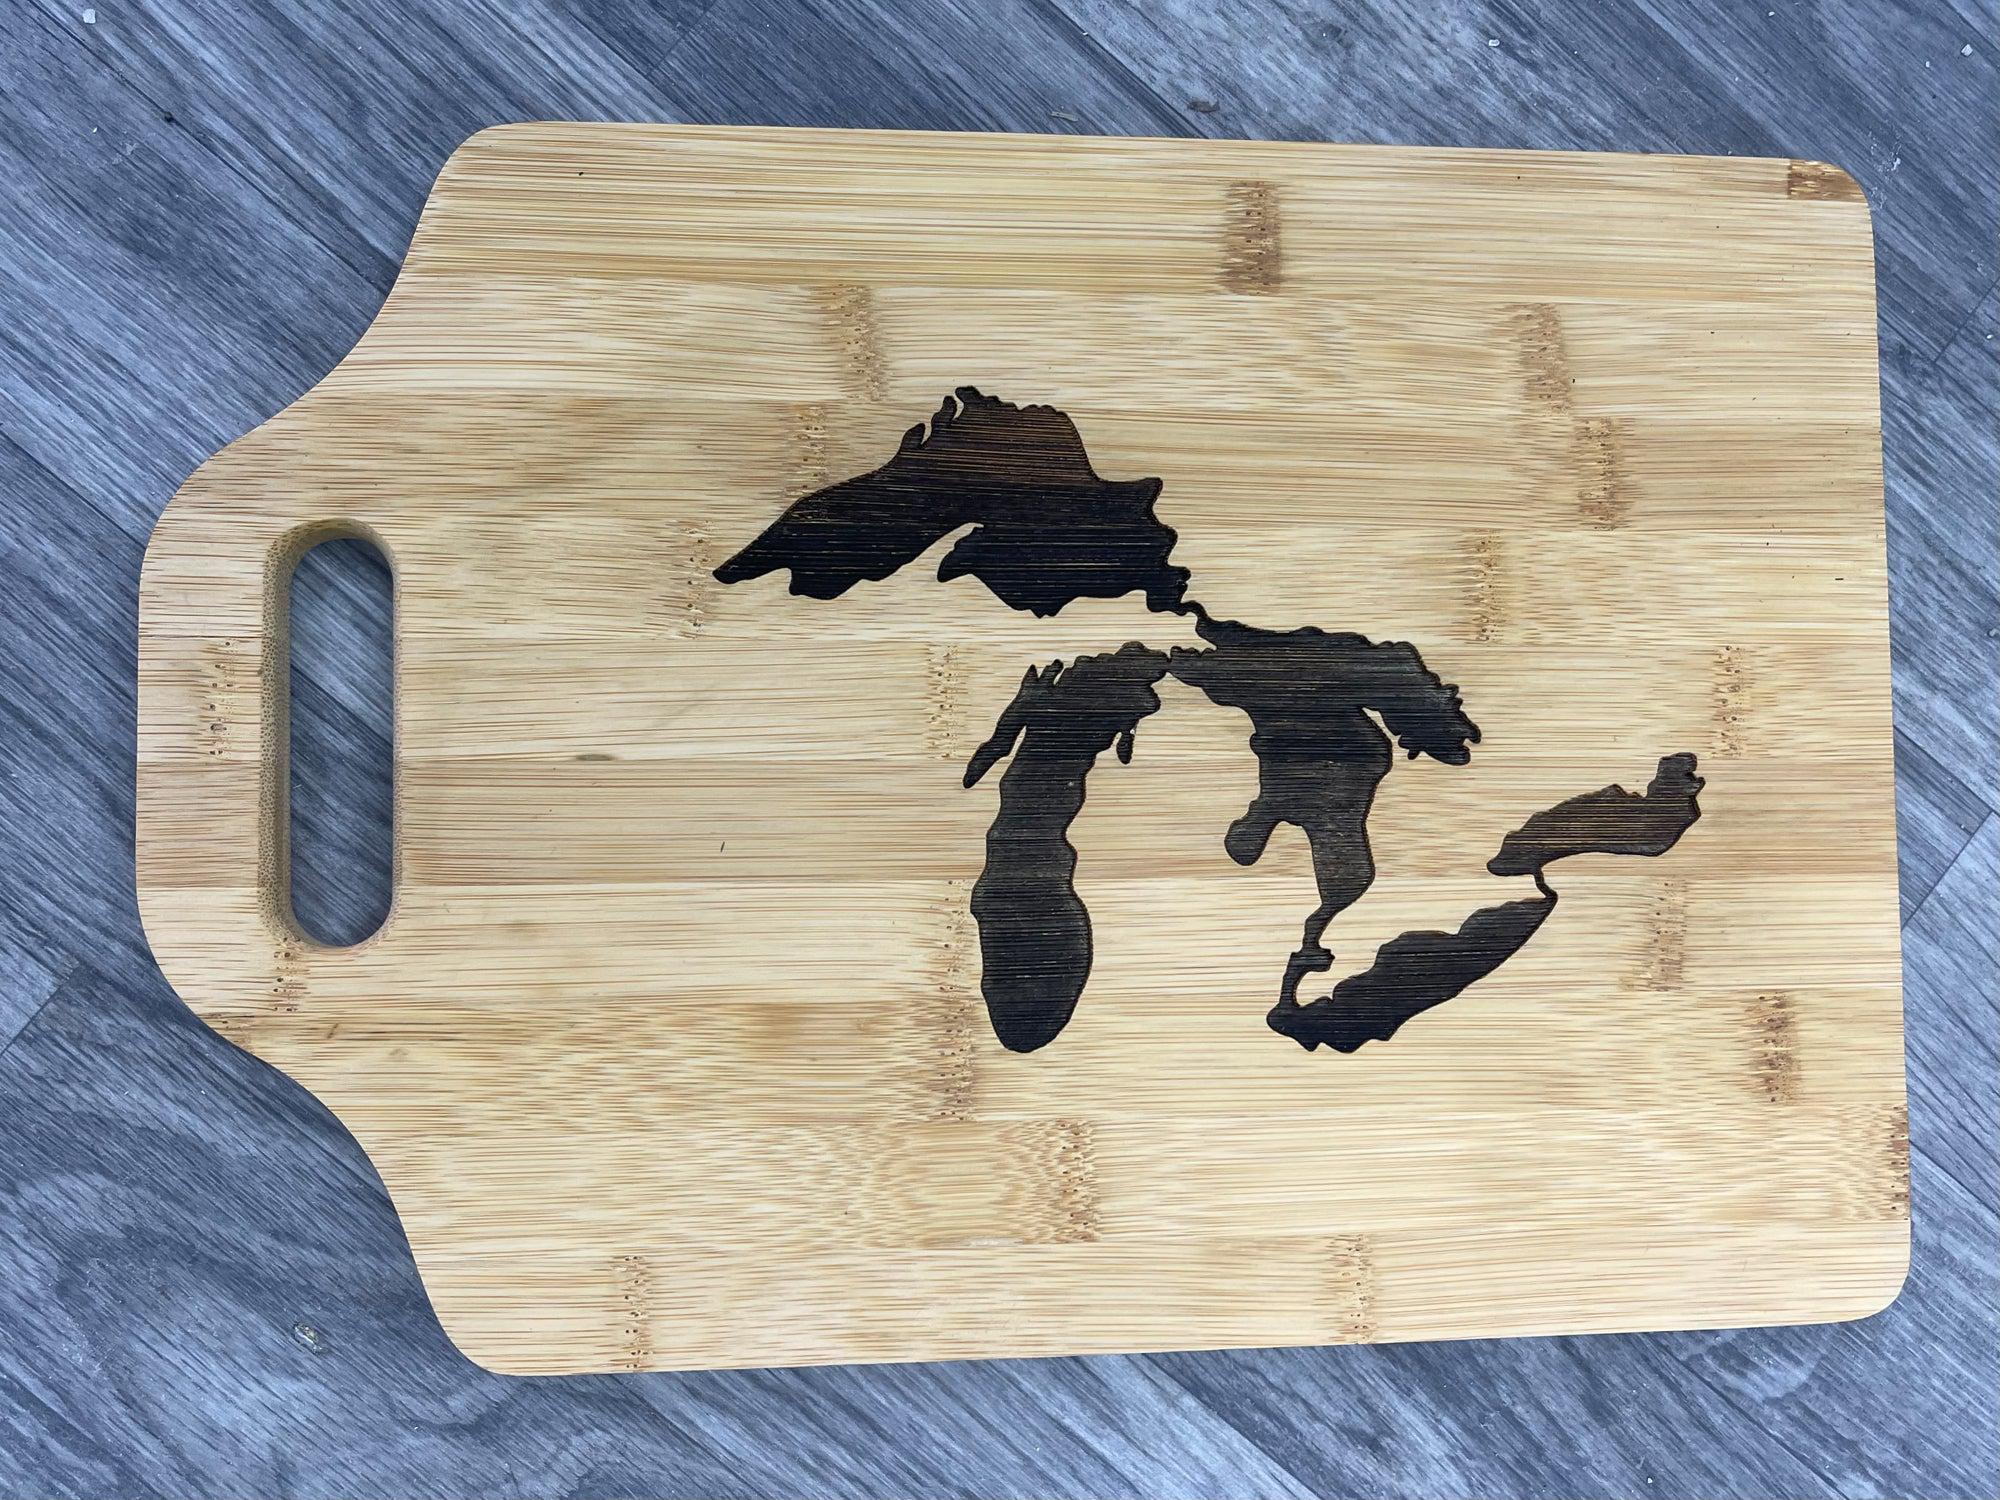 Great Lakes Medium Wooden Engraved Cutting Board